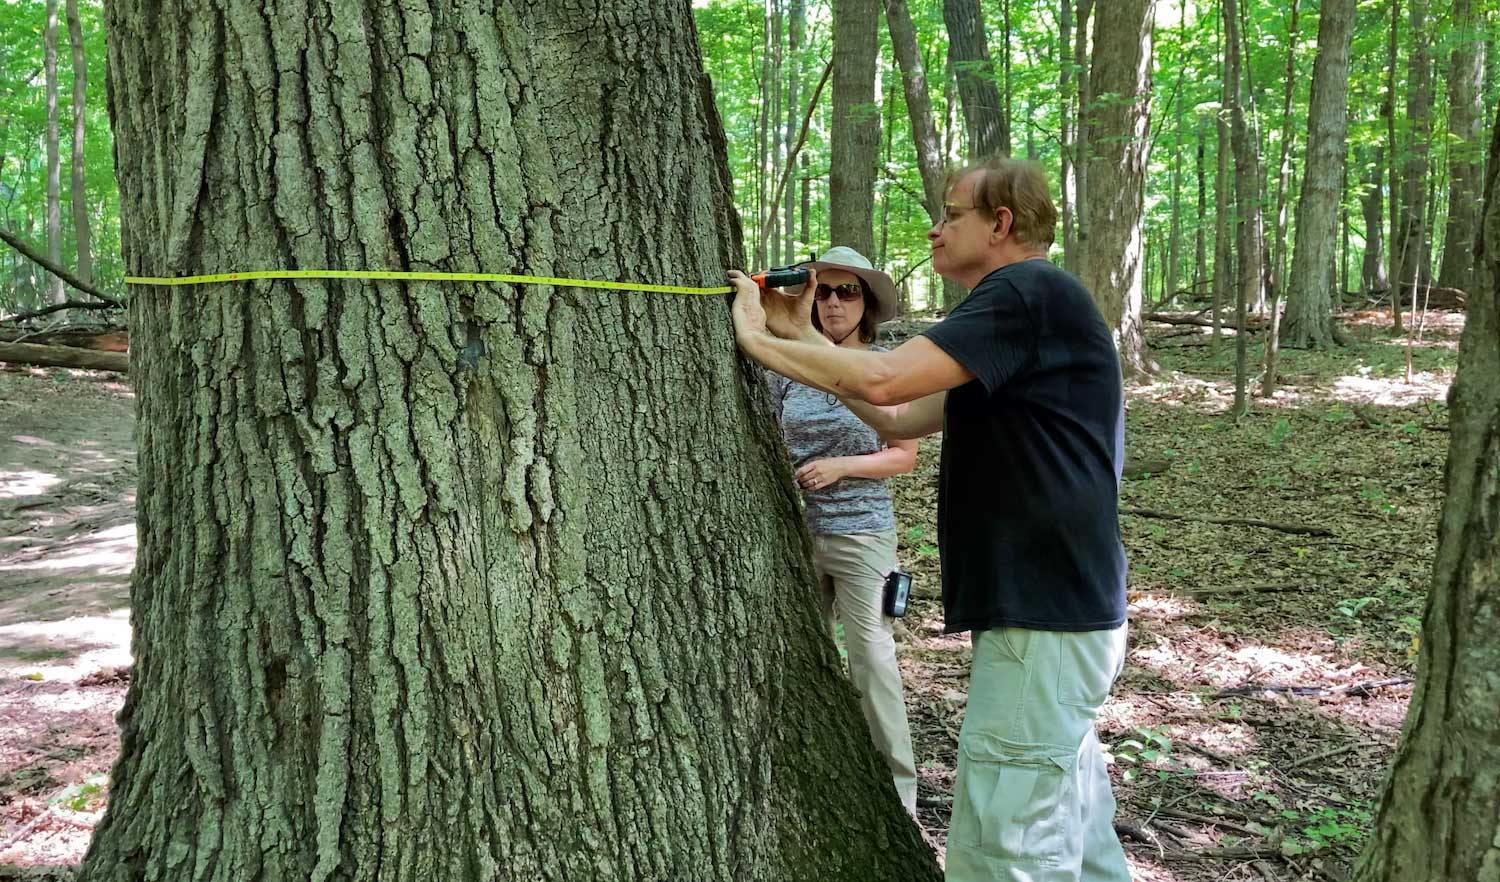 How to tell how old a tree is — without cutting it down